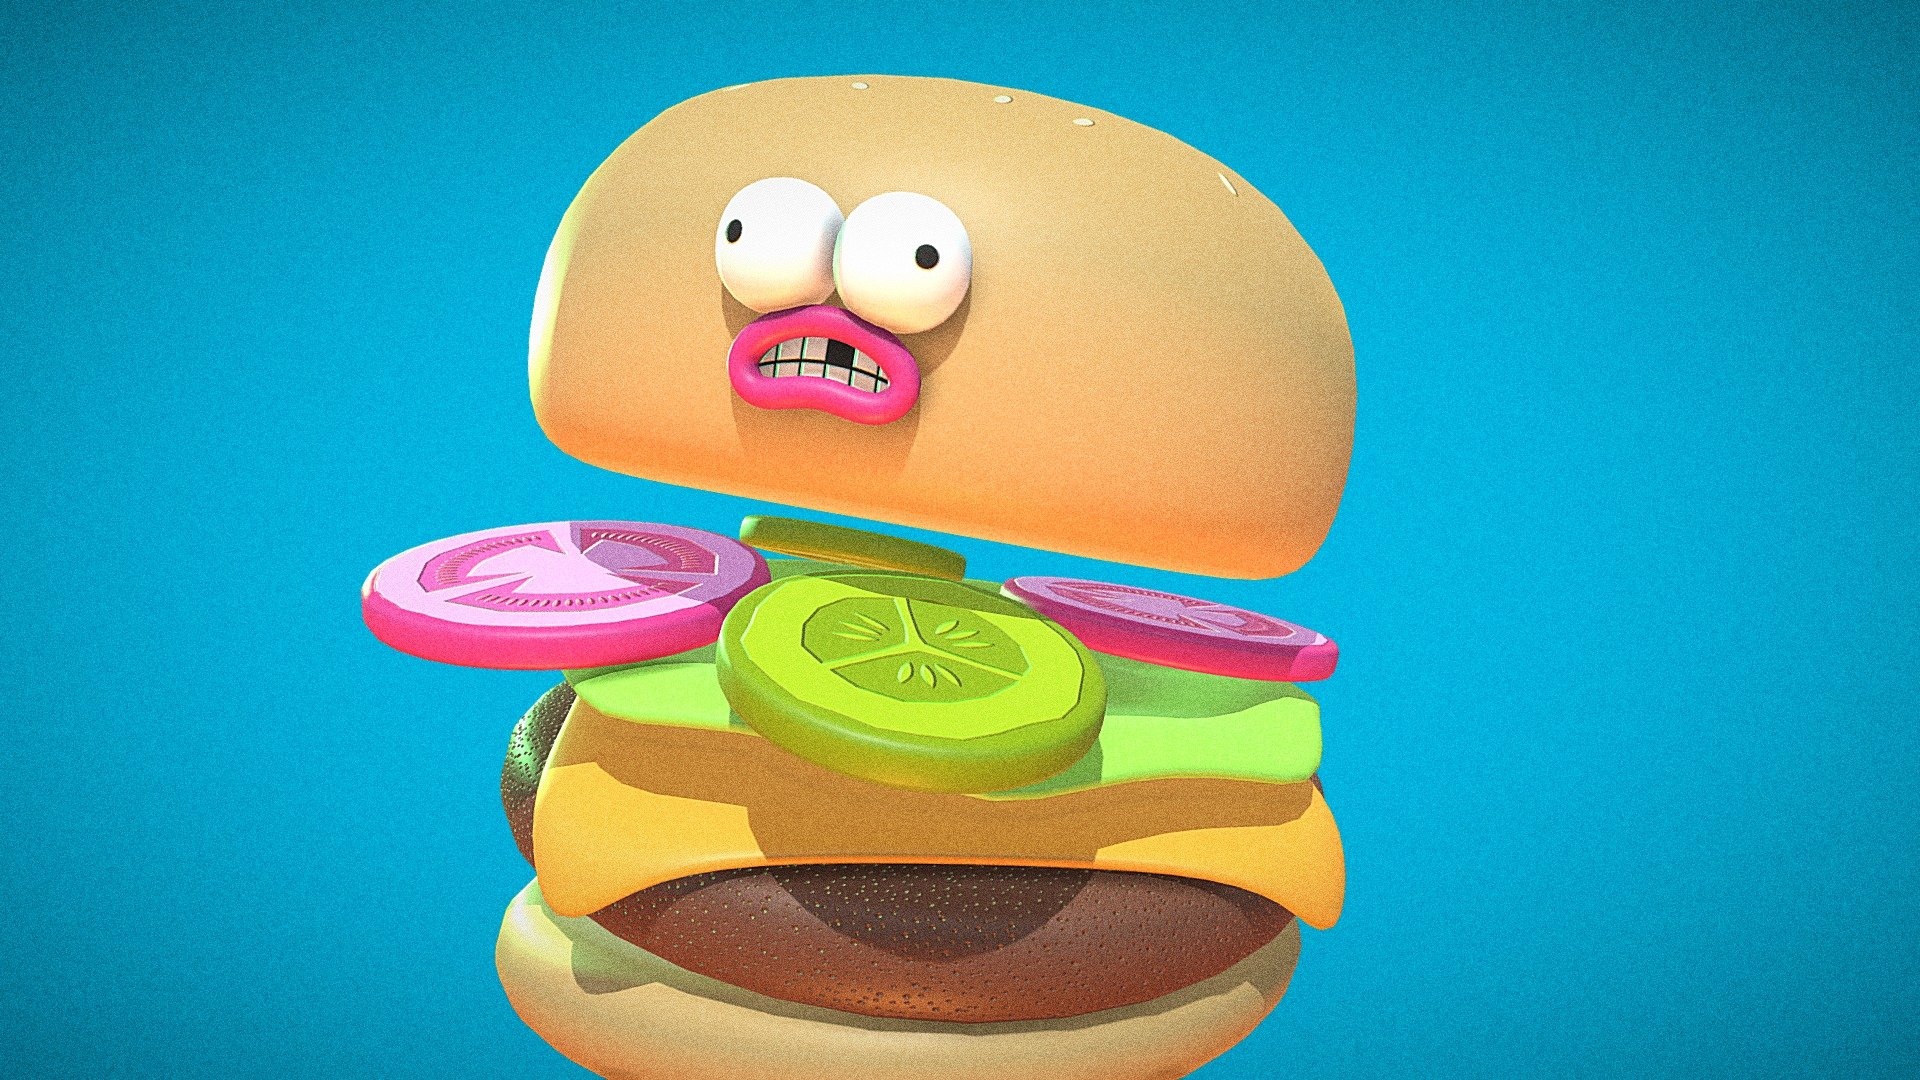 Big Kahuna Burger, Beef Boss, Bob's Burgers, the Ulti-Meatum!! I just had some fun with my own fast food fellow. 🍔🍔🍔 - Ben the Burger - Buy Royalty Free 3D model by psychrome 3d model